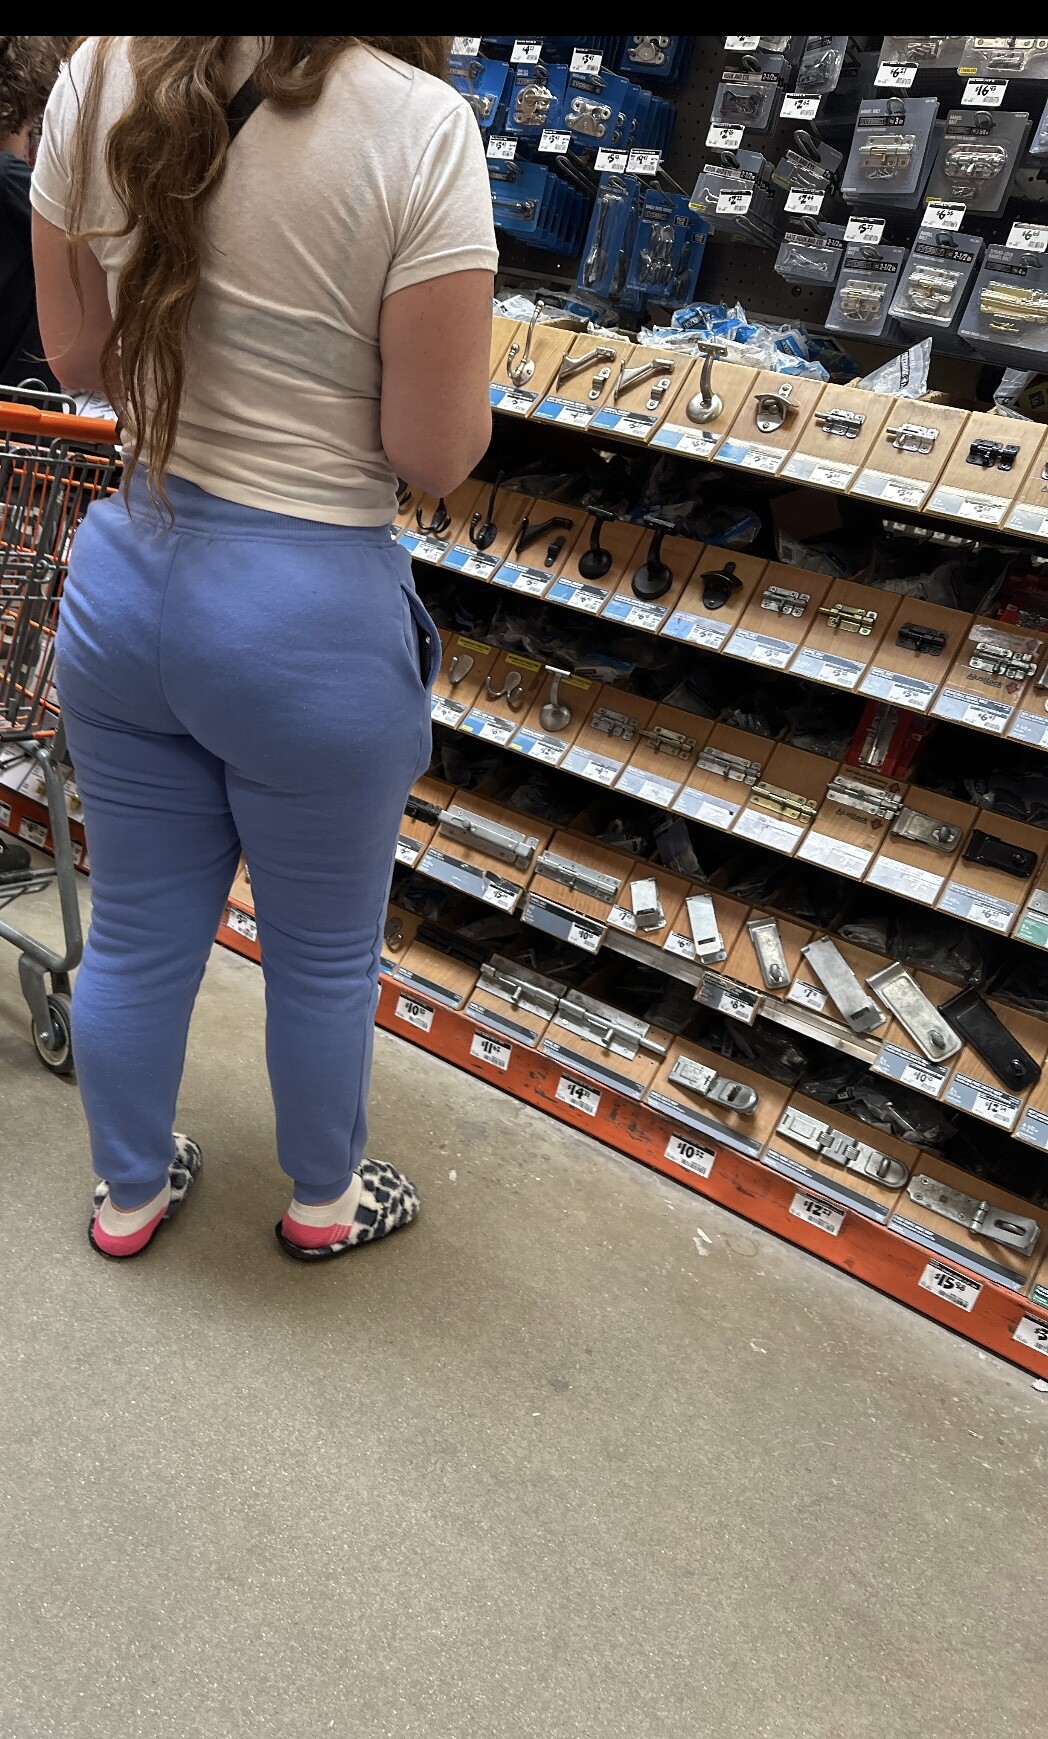 Phat booty pawg